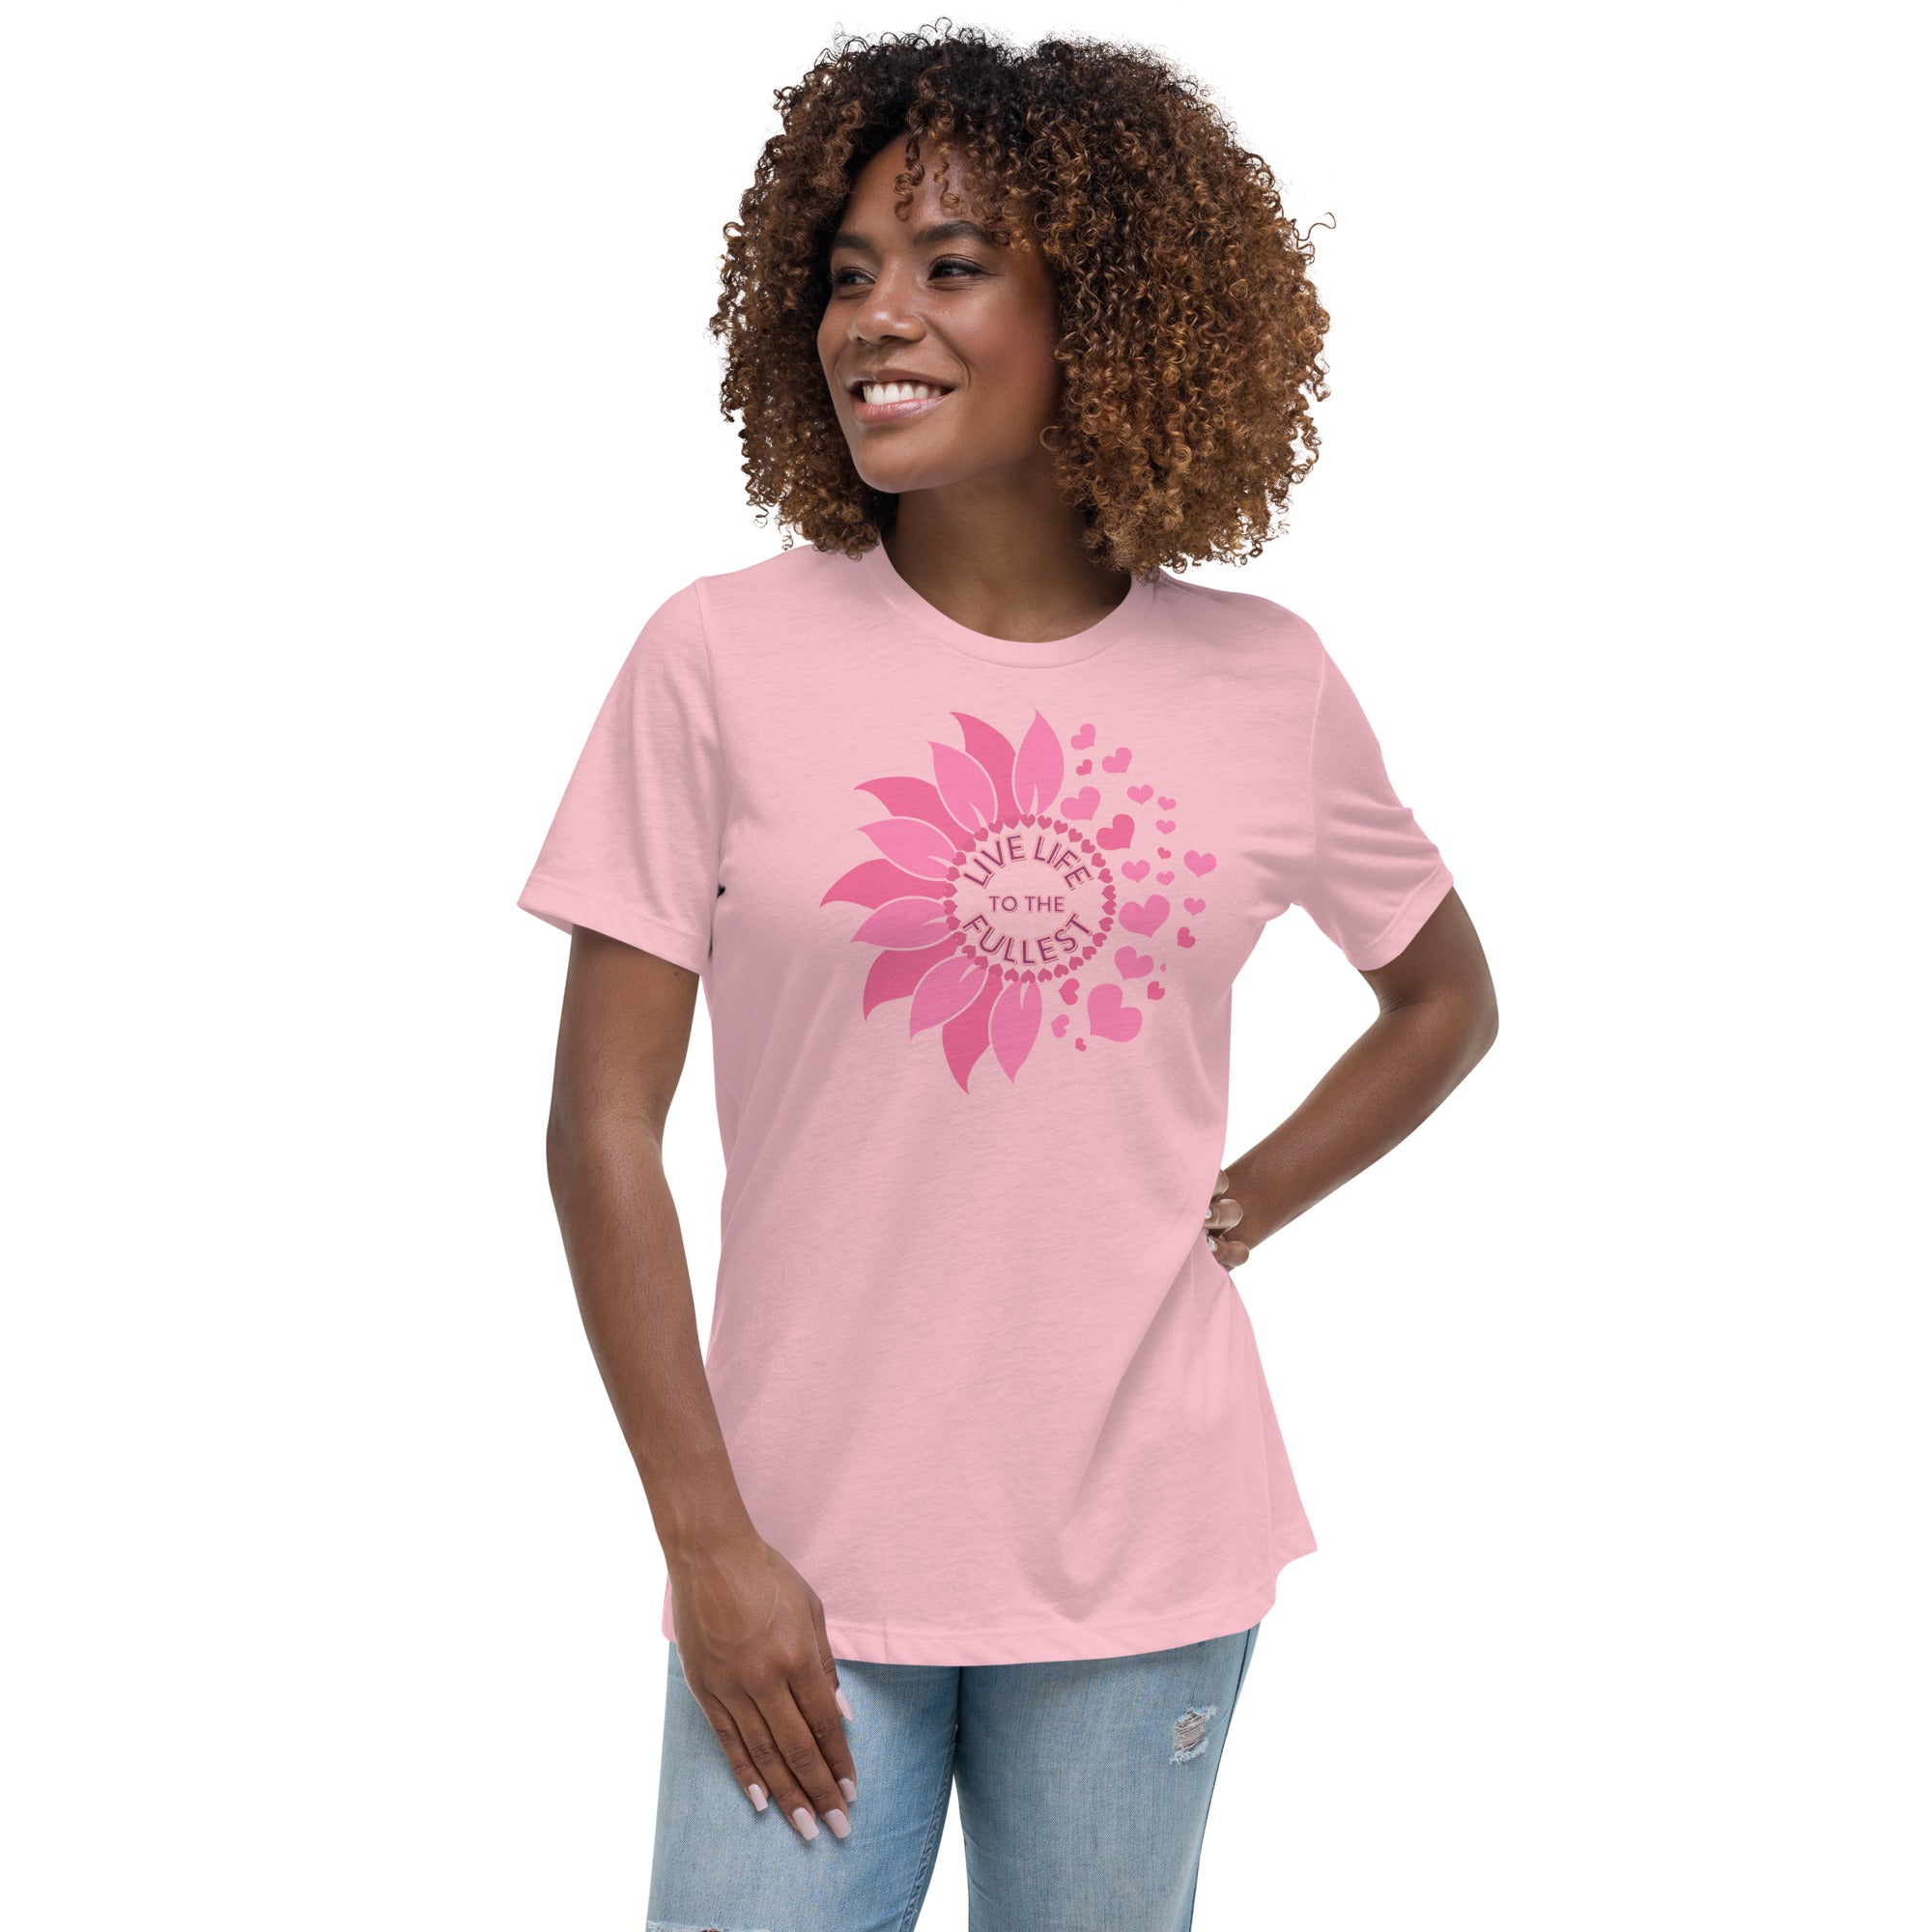 Live Life To The Fullest Women's Relaxed T-Shirt